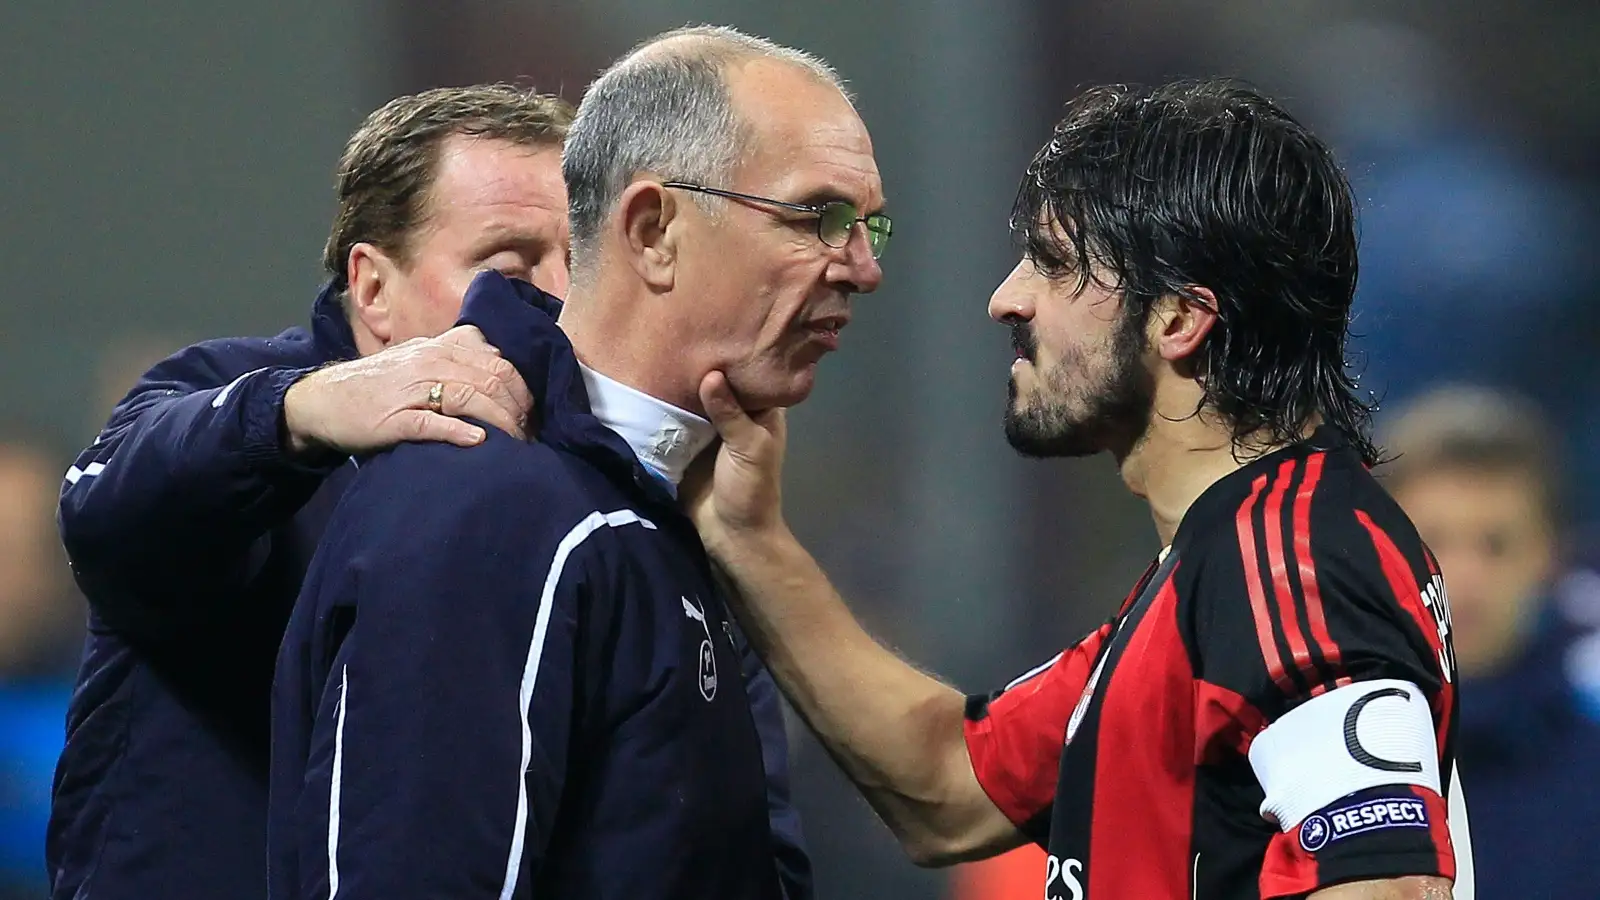 AC Milan's Gennaro Gattuso (R) argues with Tottenham Hotspur's first team coach Joe Jordan (C) next to manager Harry Redknapp during the Champions League match at San Siro, Milan, Italy, February 2011.